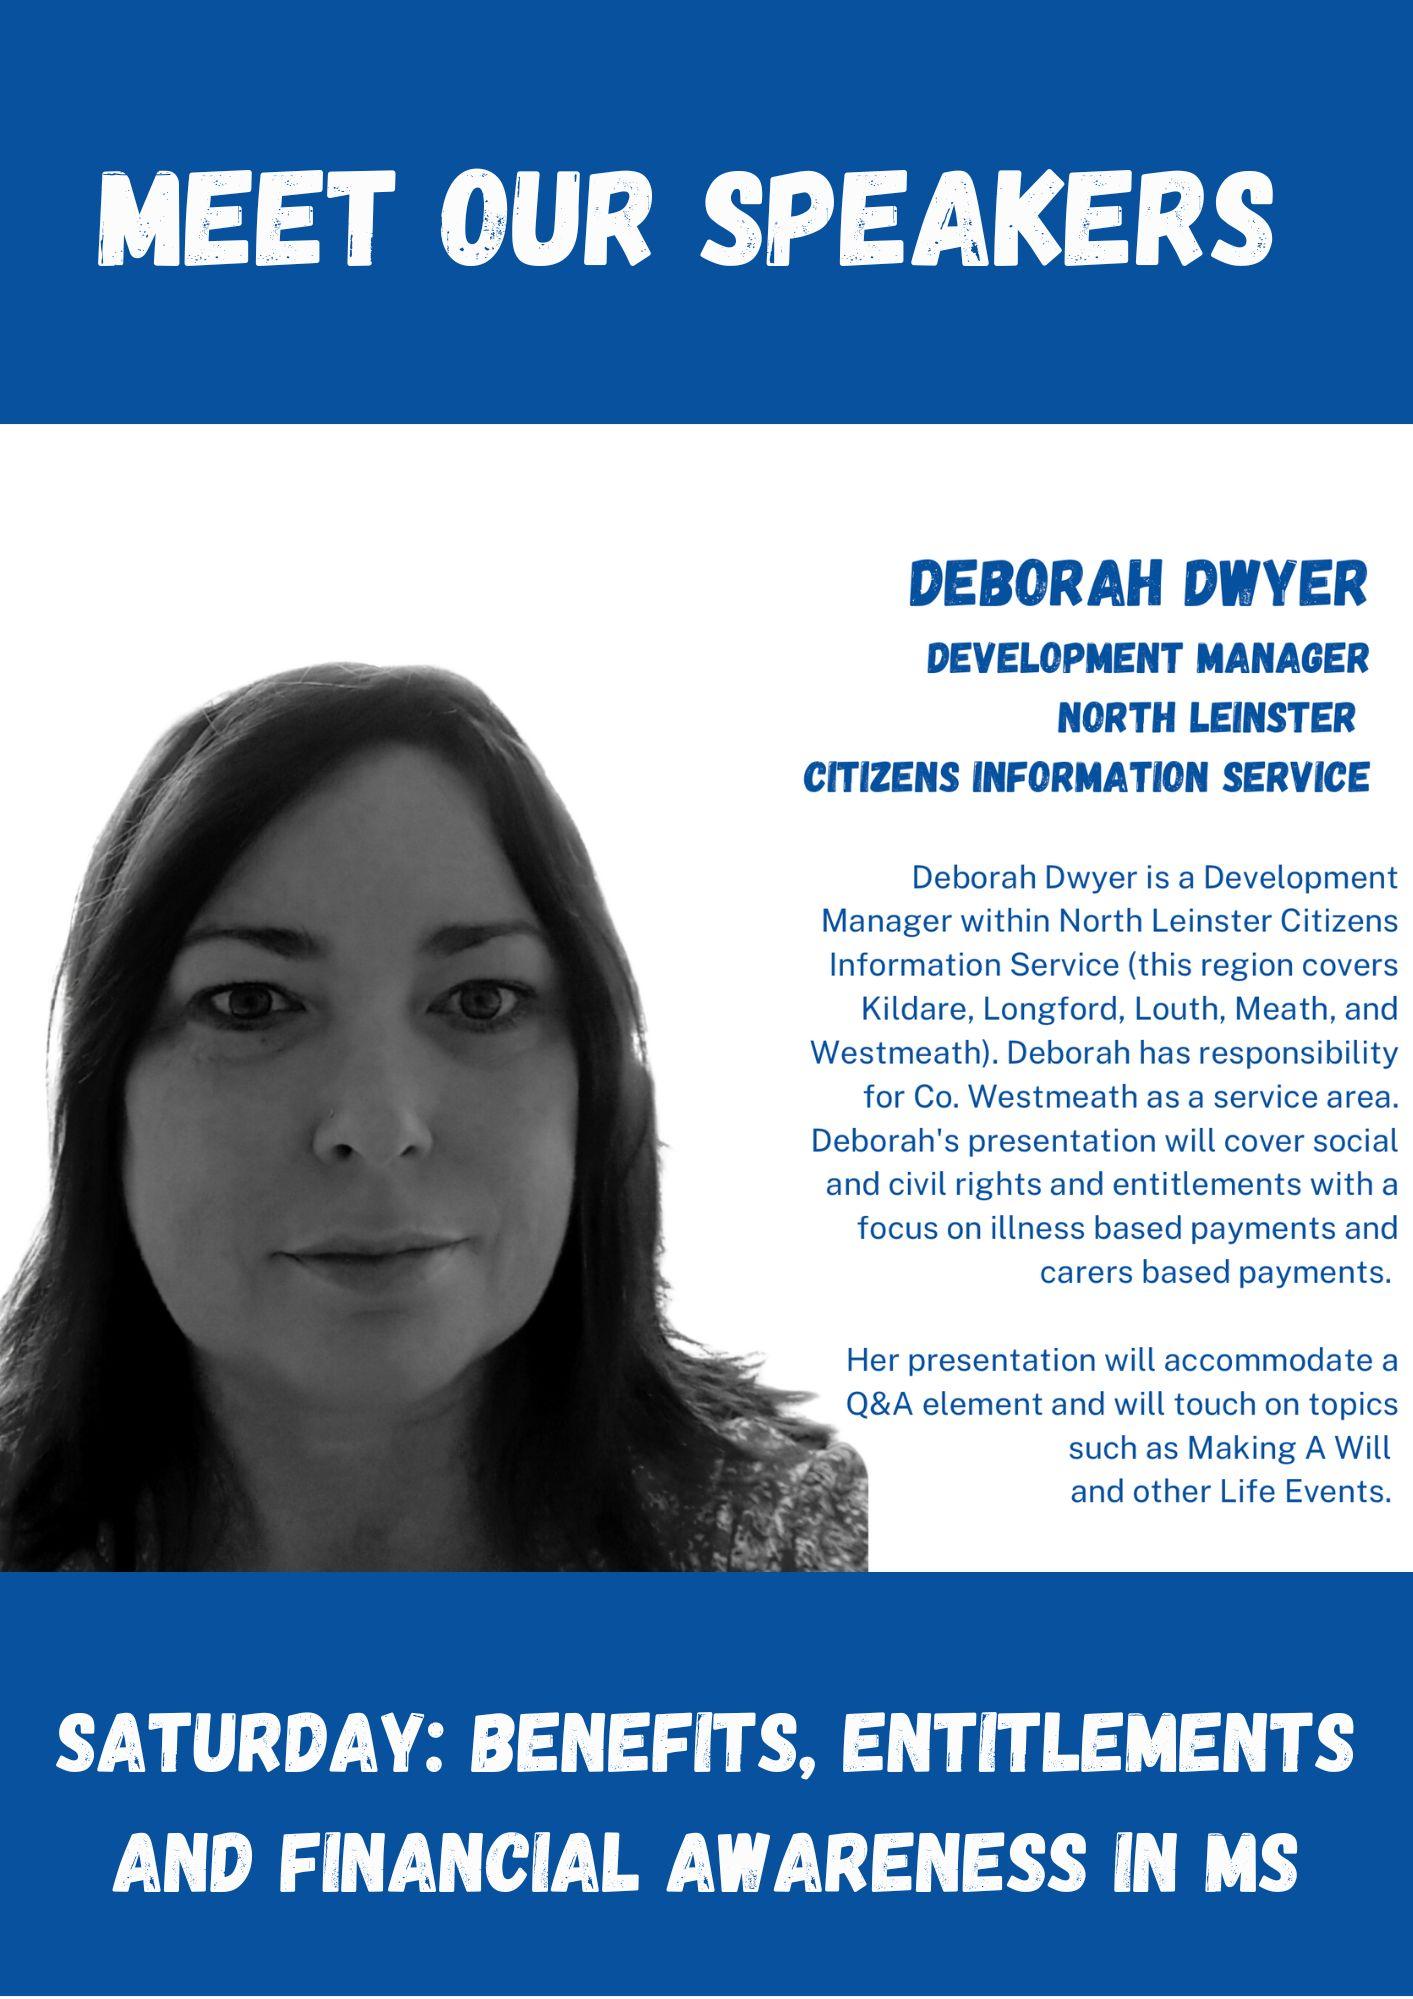 Image of dEBORAH DWYER with blue text on white background